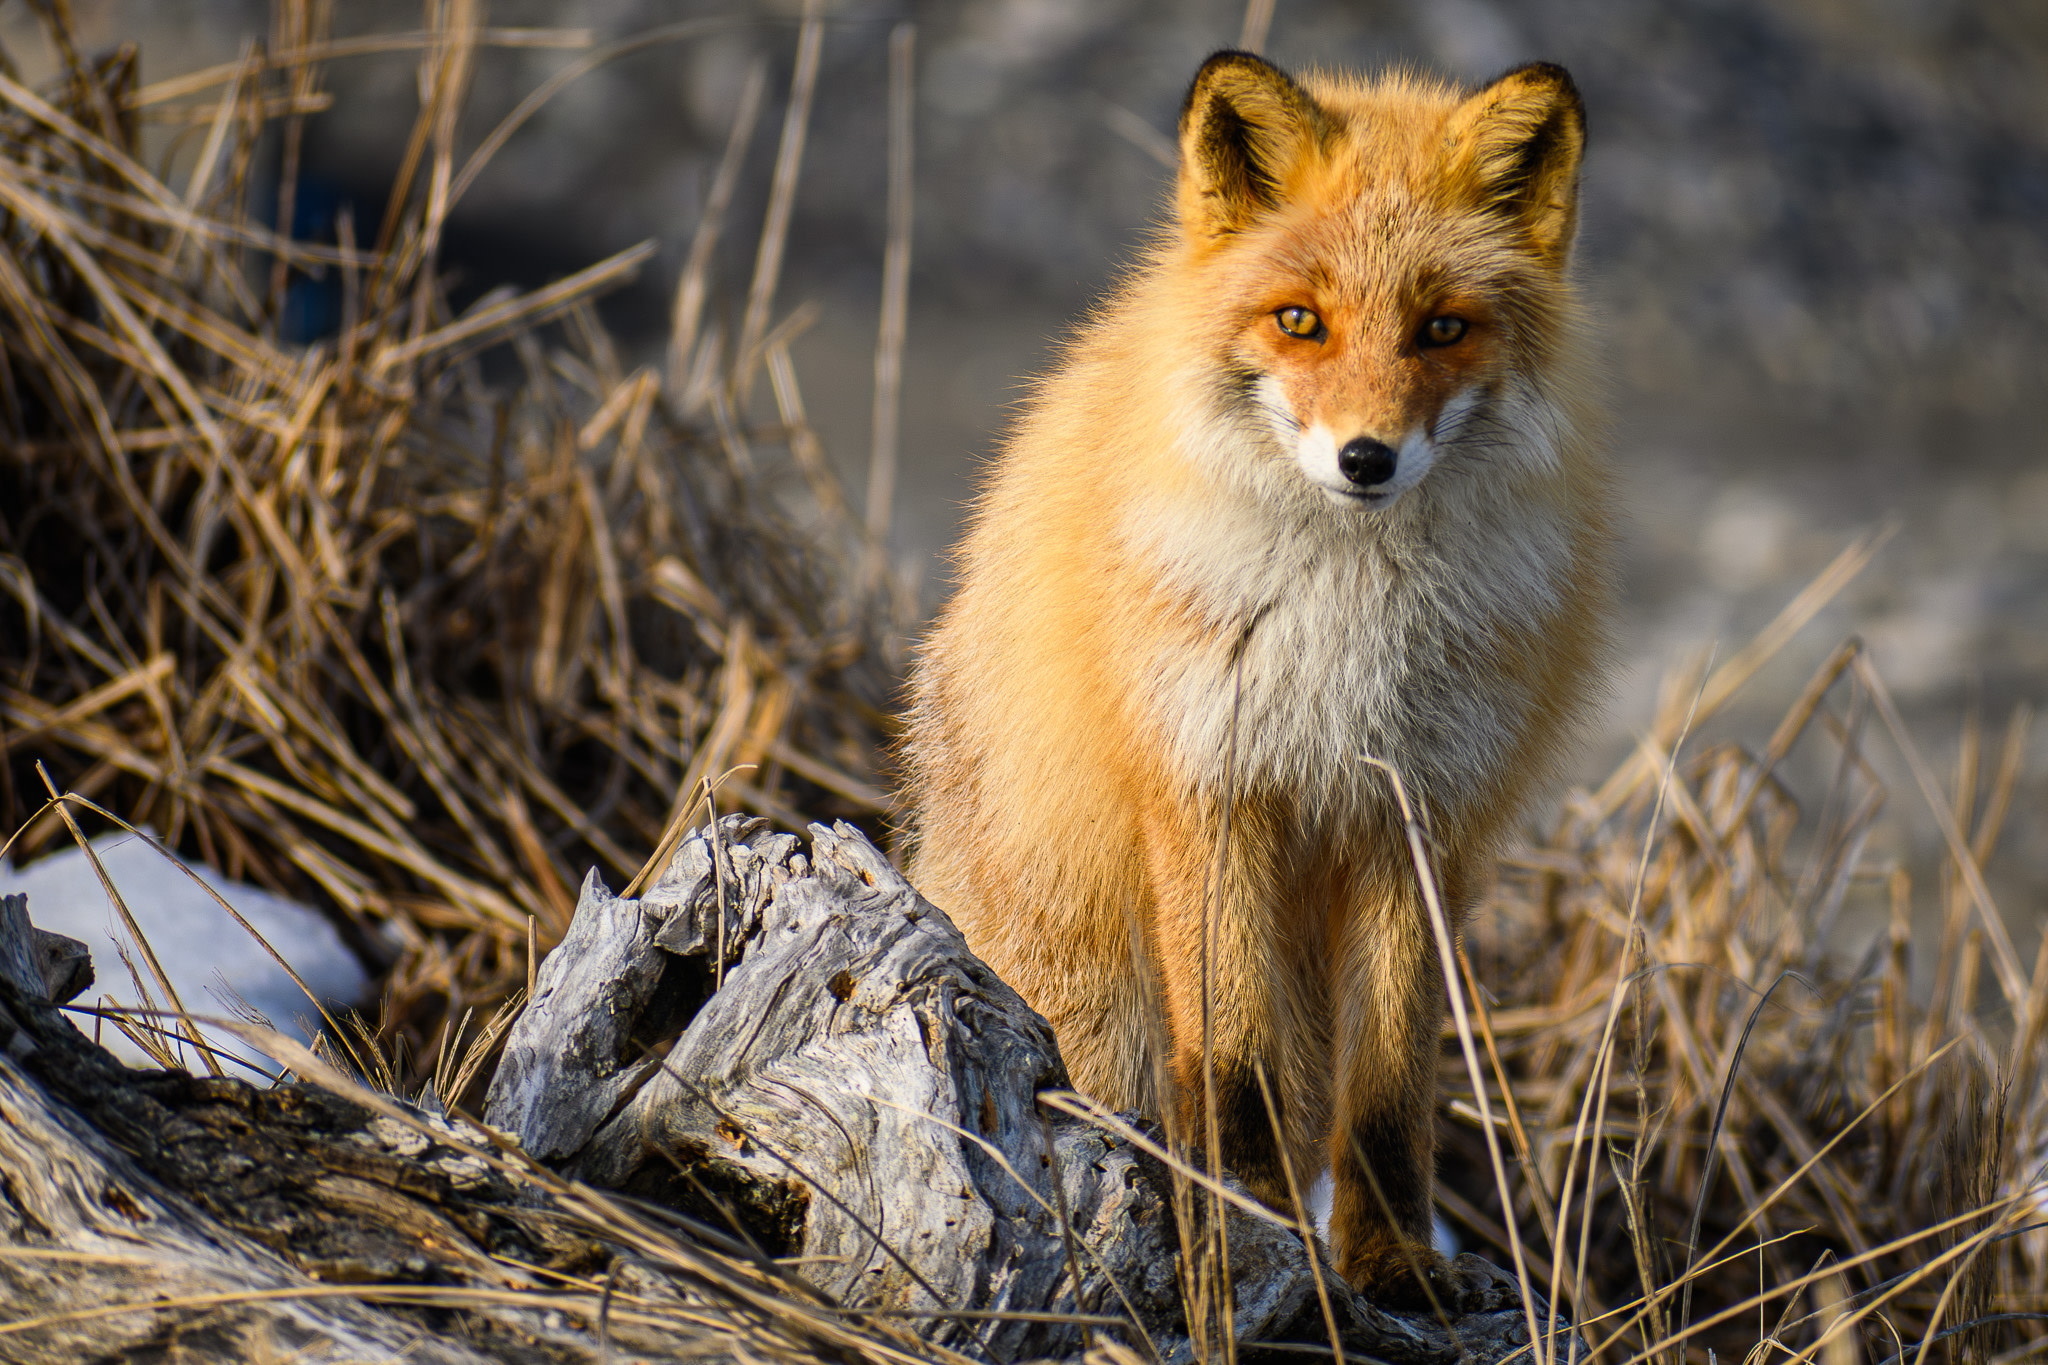 A fox looks directly into the camera's lens.